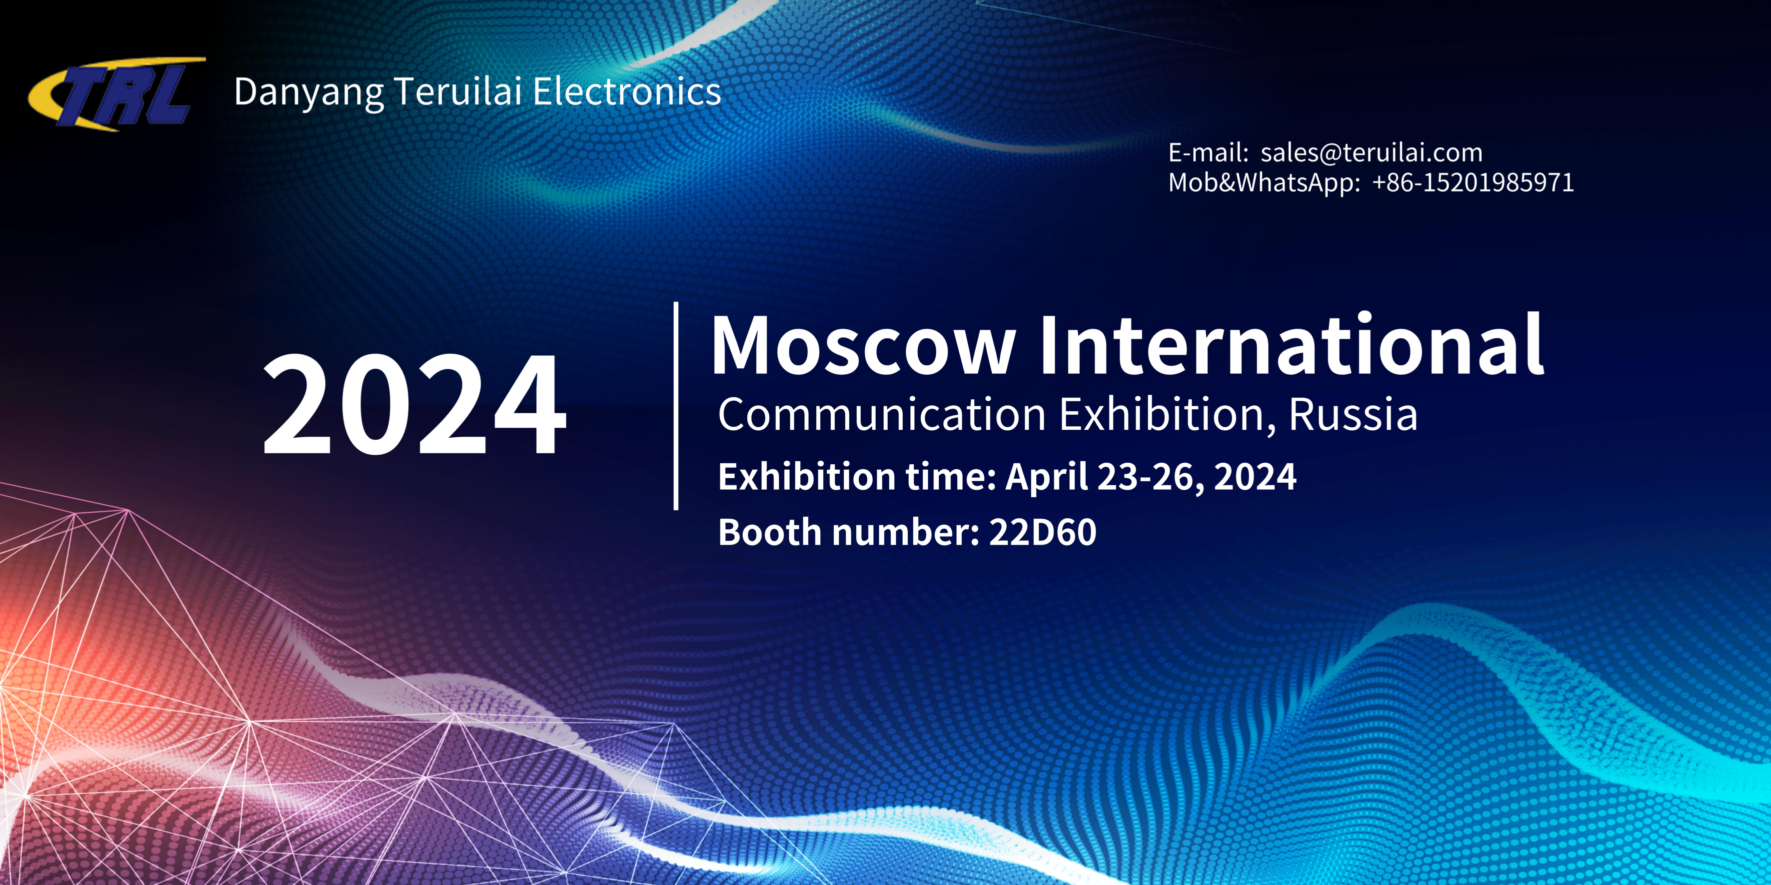 2024 Moscow International Communication Exhibition, Russia